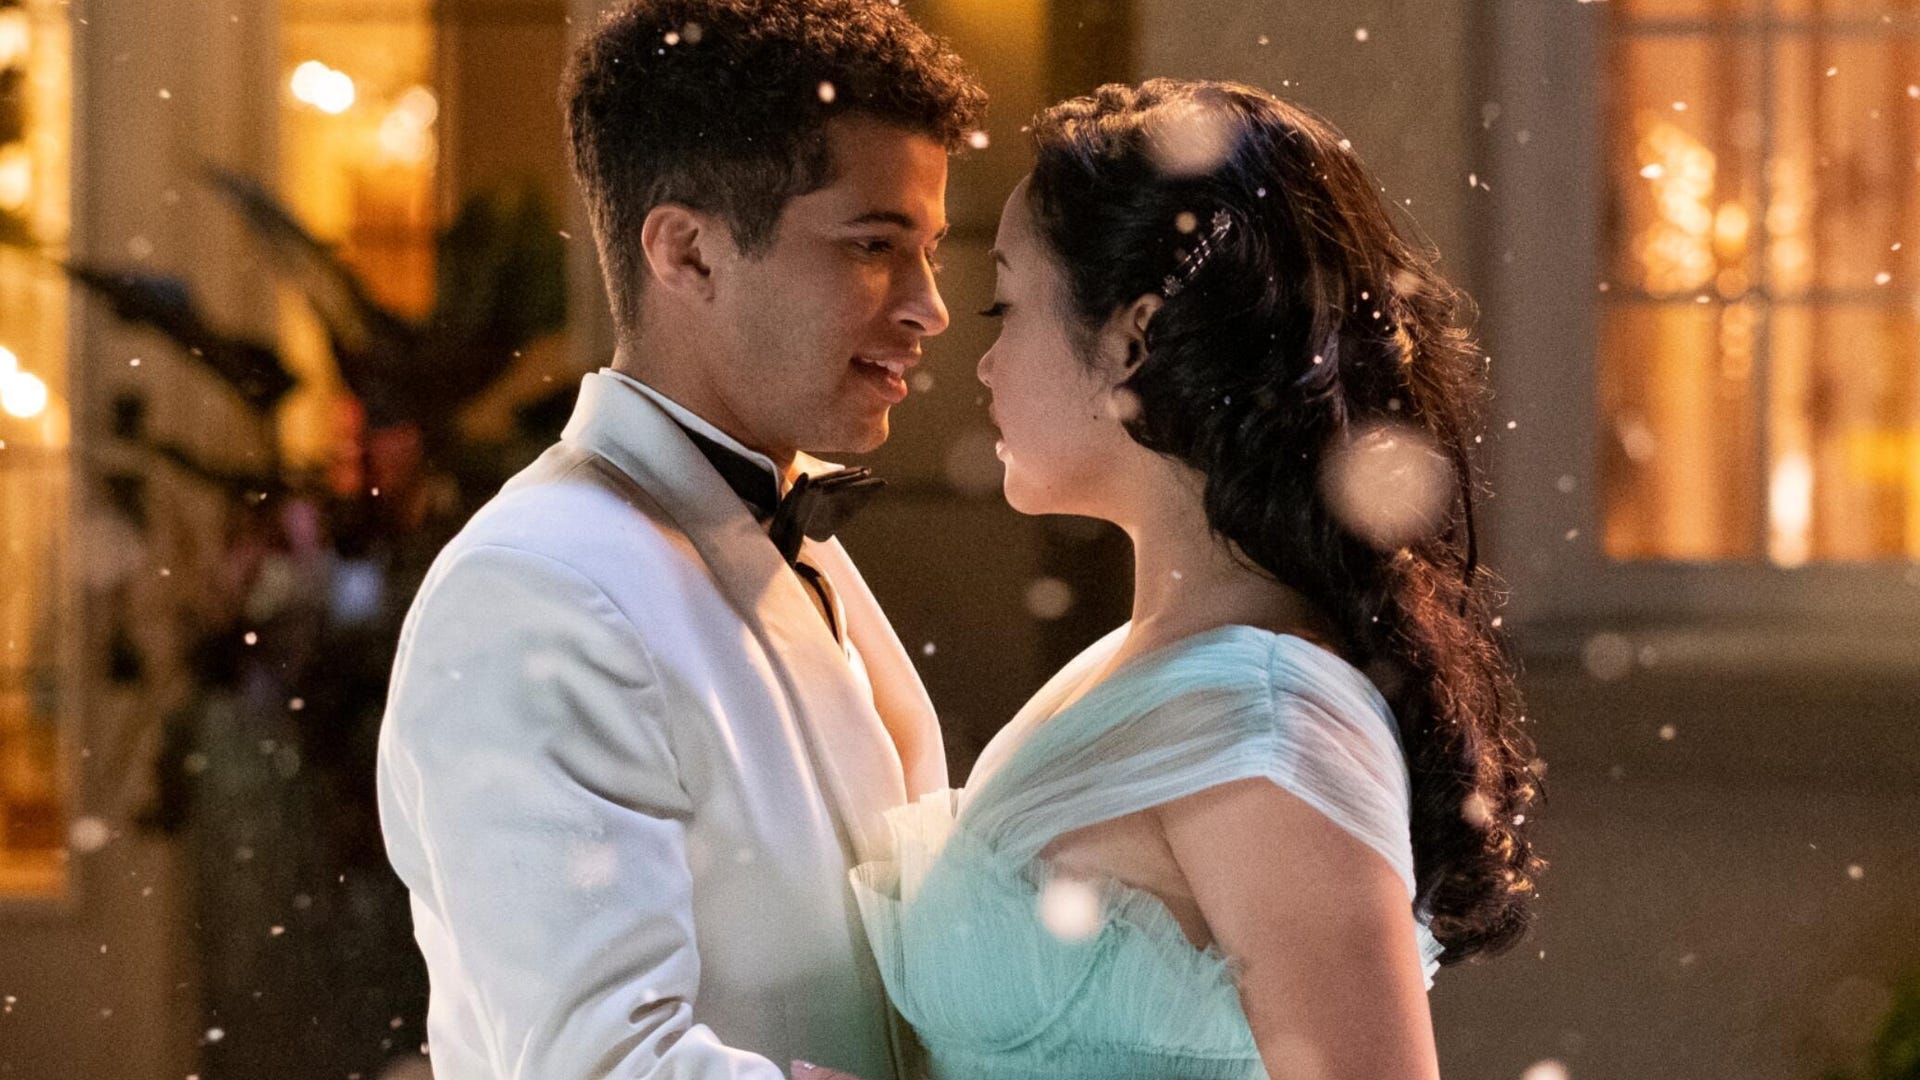 Jordan Fisher and Lana Condor, To All the Boys: P.S. I Still Love You